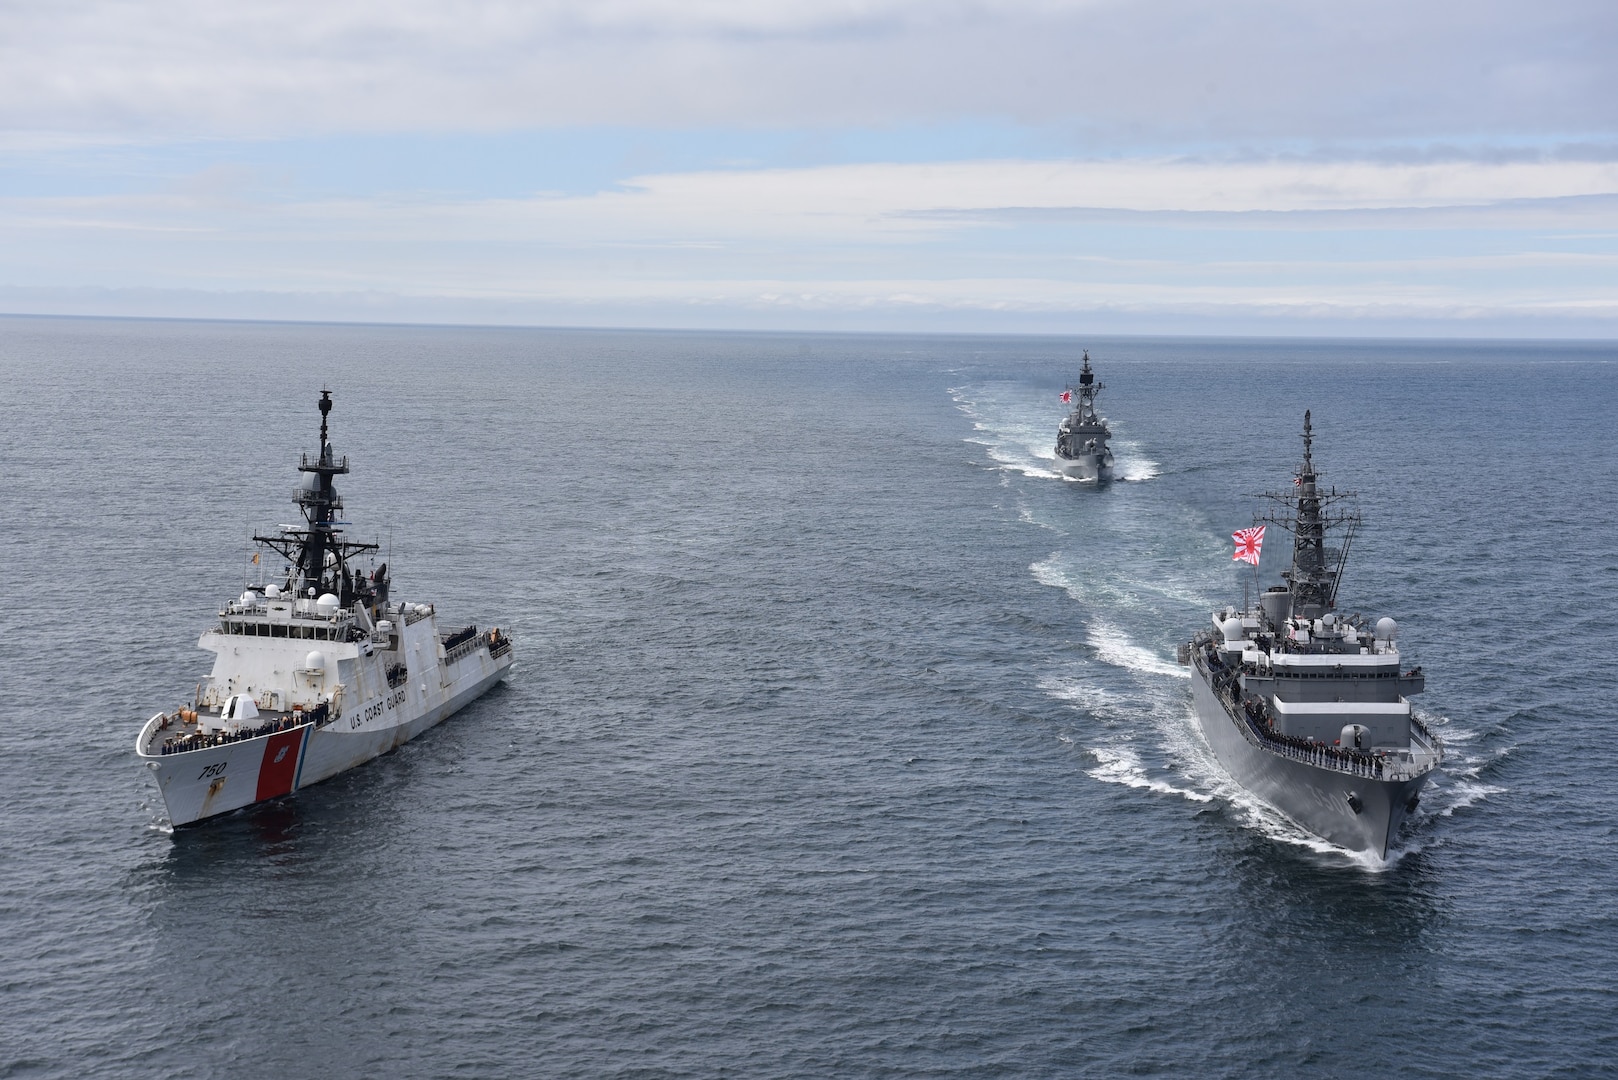 U.S. Coast Guard Cutter Bertholf (WMSL 750) sails alongside Japanese Military Self Defense Force Training Ships HATAKAZE and KASHIMA in the Bering Sea, June 3, 2023. In a demonstration of alliance between Japan and the United States, Bertholf conducted major at-sea and shore side engagements with the Japan Maritime Self Defense Force (JMSDF) training ships Kashima and Hatakaze. During the at-sea engagement, Bertholf, Kashima and Hatakaze executed multiple formations, and during a farewell pass, the JMSDF personnel displayed a highly impressive drumline performance on their flight deck. (U.S. Coast Guard photo by Lt. Cmdr. Scott McCann)